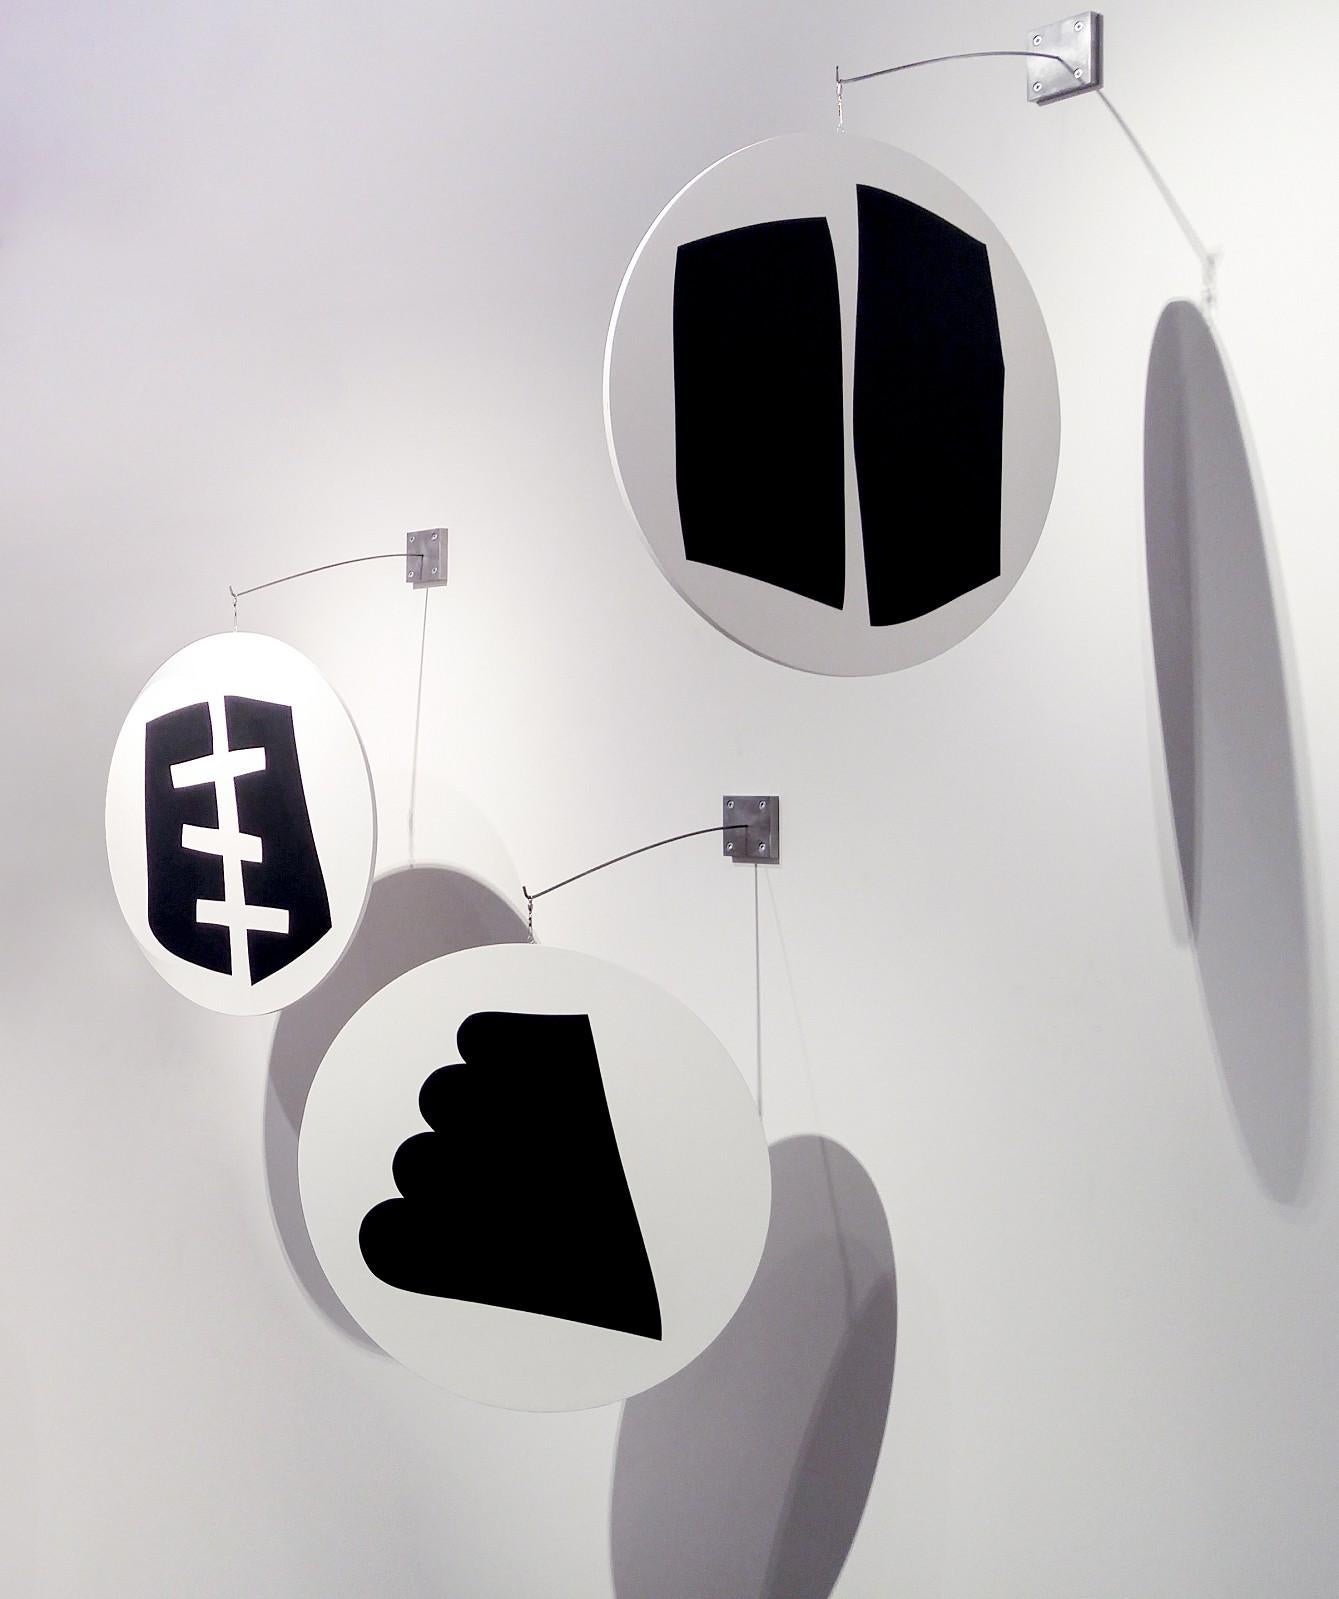 A Group of 3 Rounds containing various Black Shapes - hanging wall sculpture - Sculpture by Aron Hill